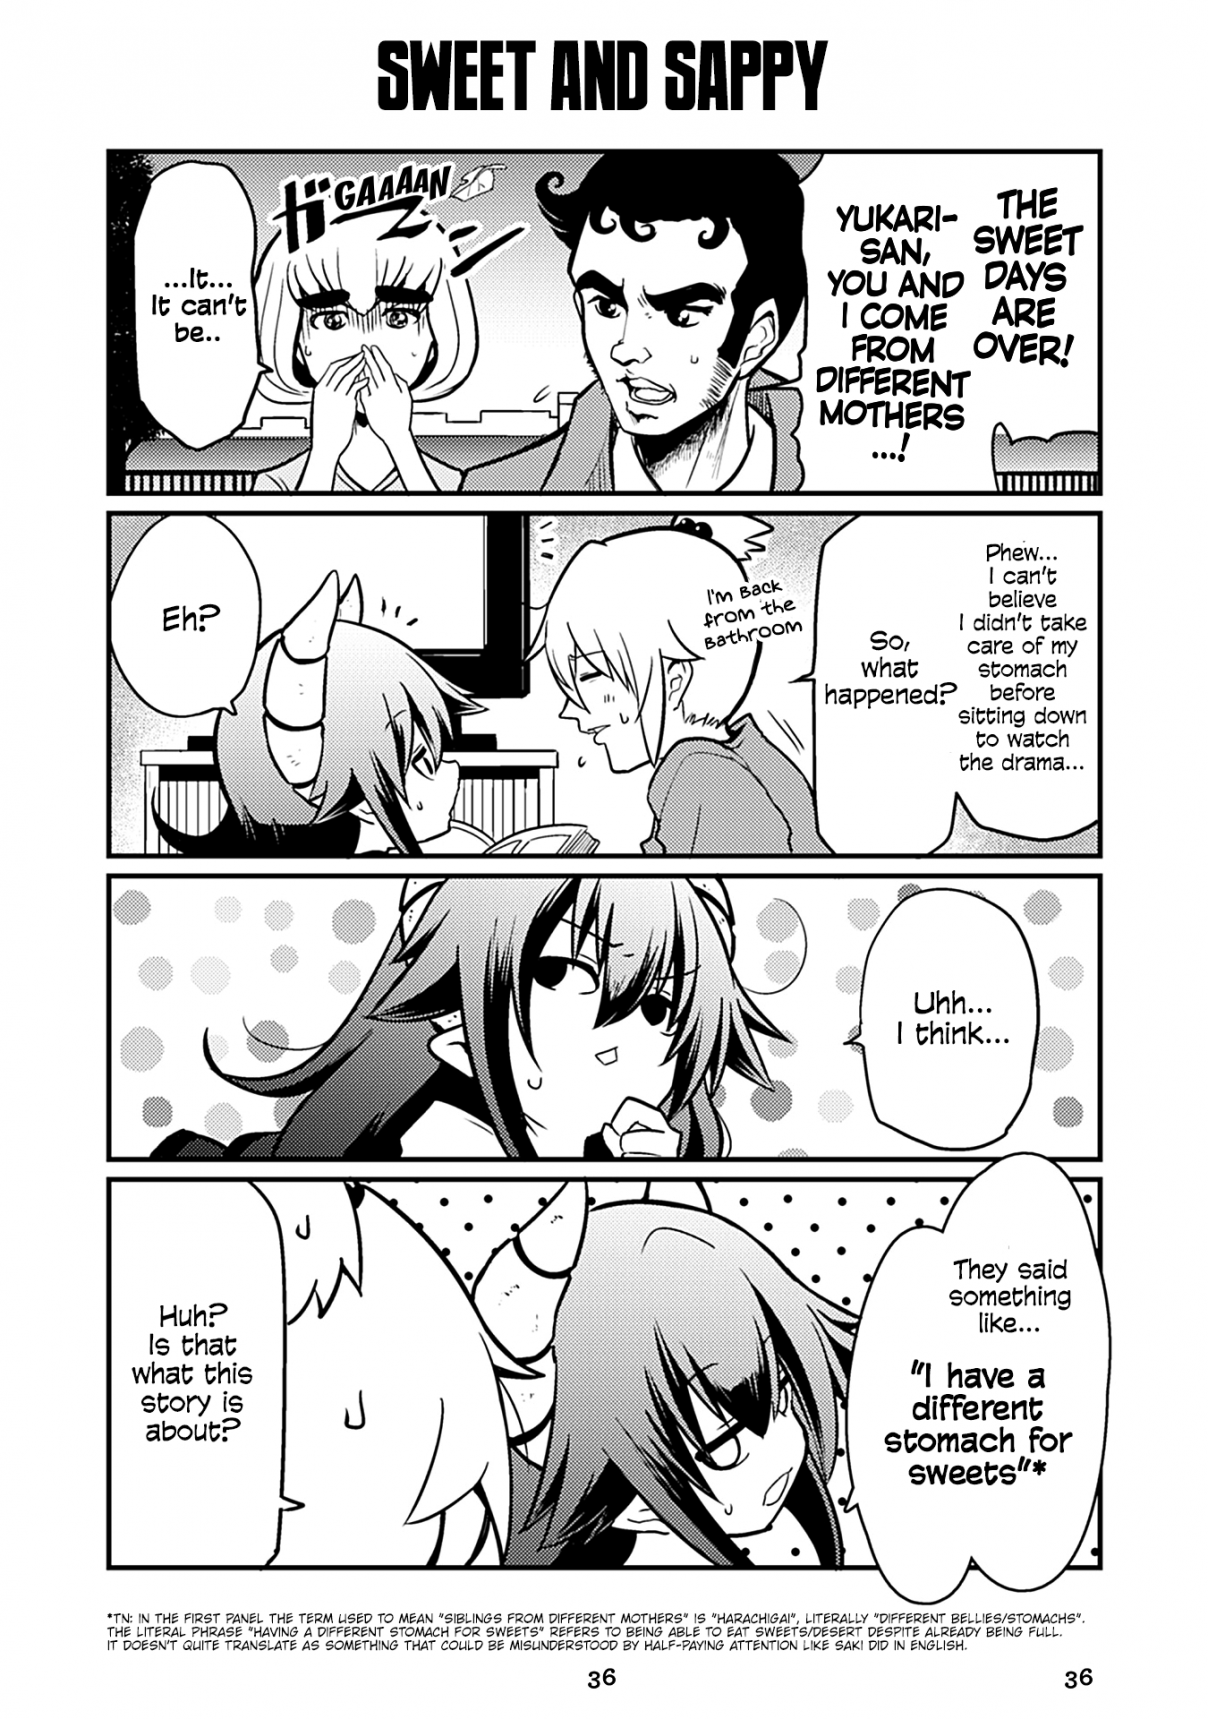 Naughty Succubus "Saki chan" Vol. 2 Ch. 128 Sweet and Sappy